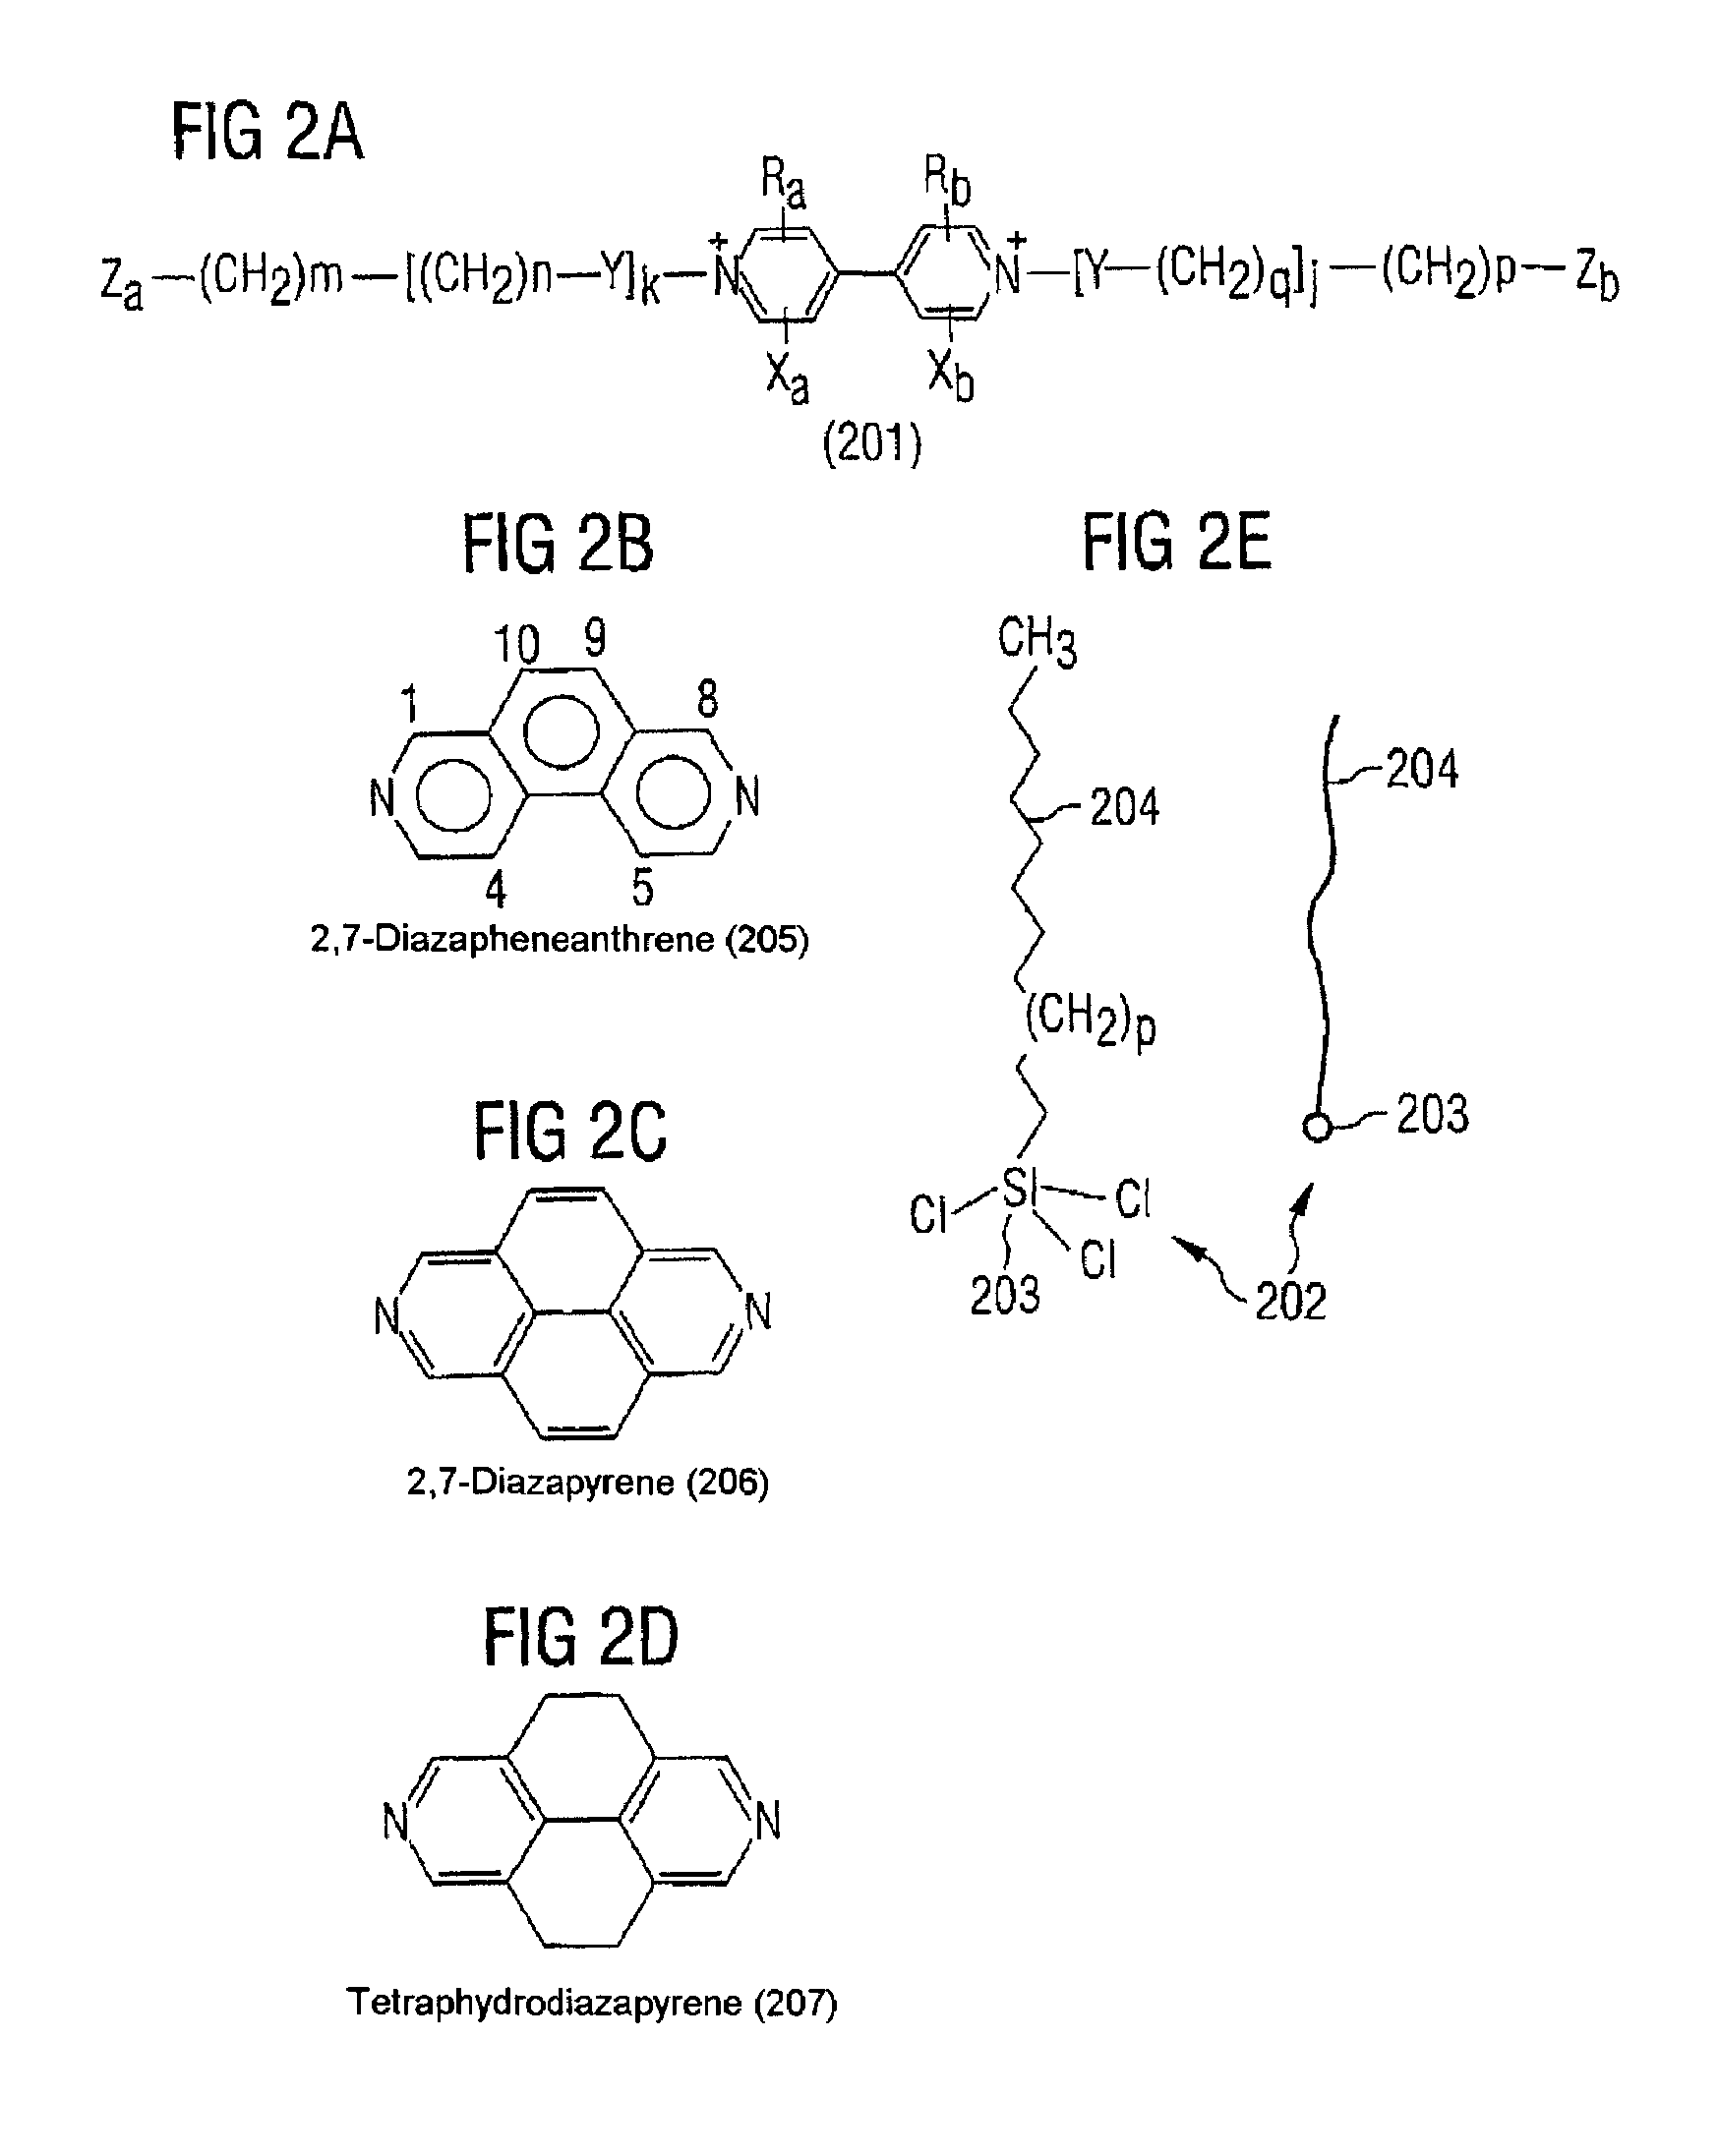 Circuit element having a first layer composed of an electrically insulating substrate material, a method for producing a circuit element, bispyridinium compounds and their use in circuit elements